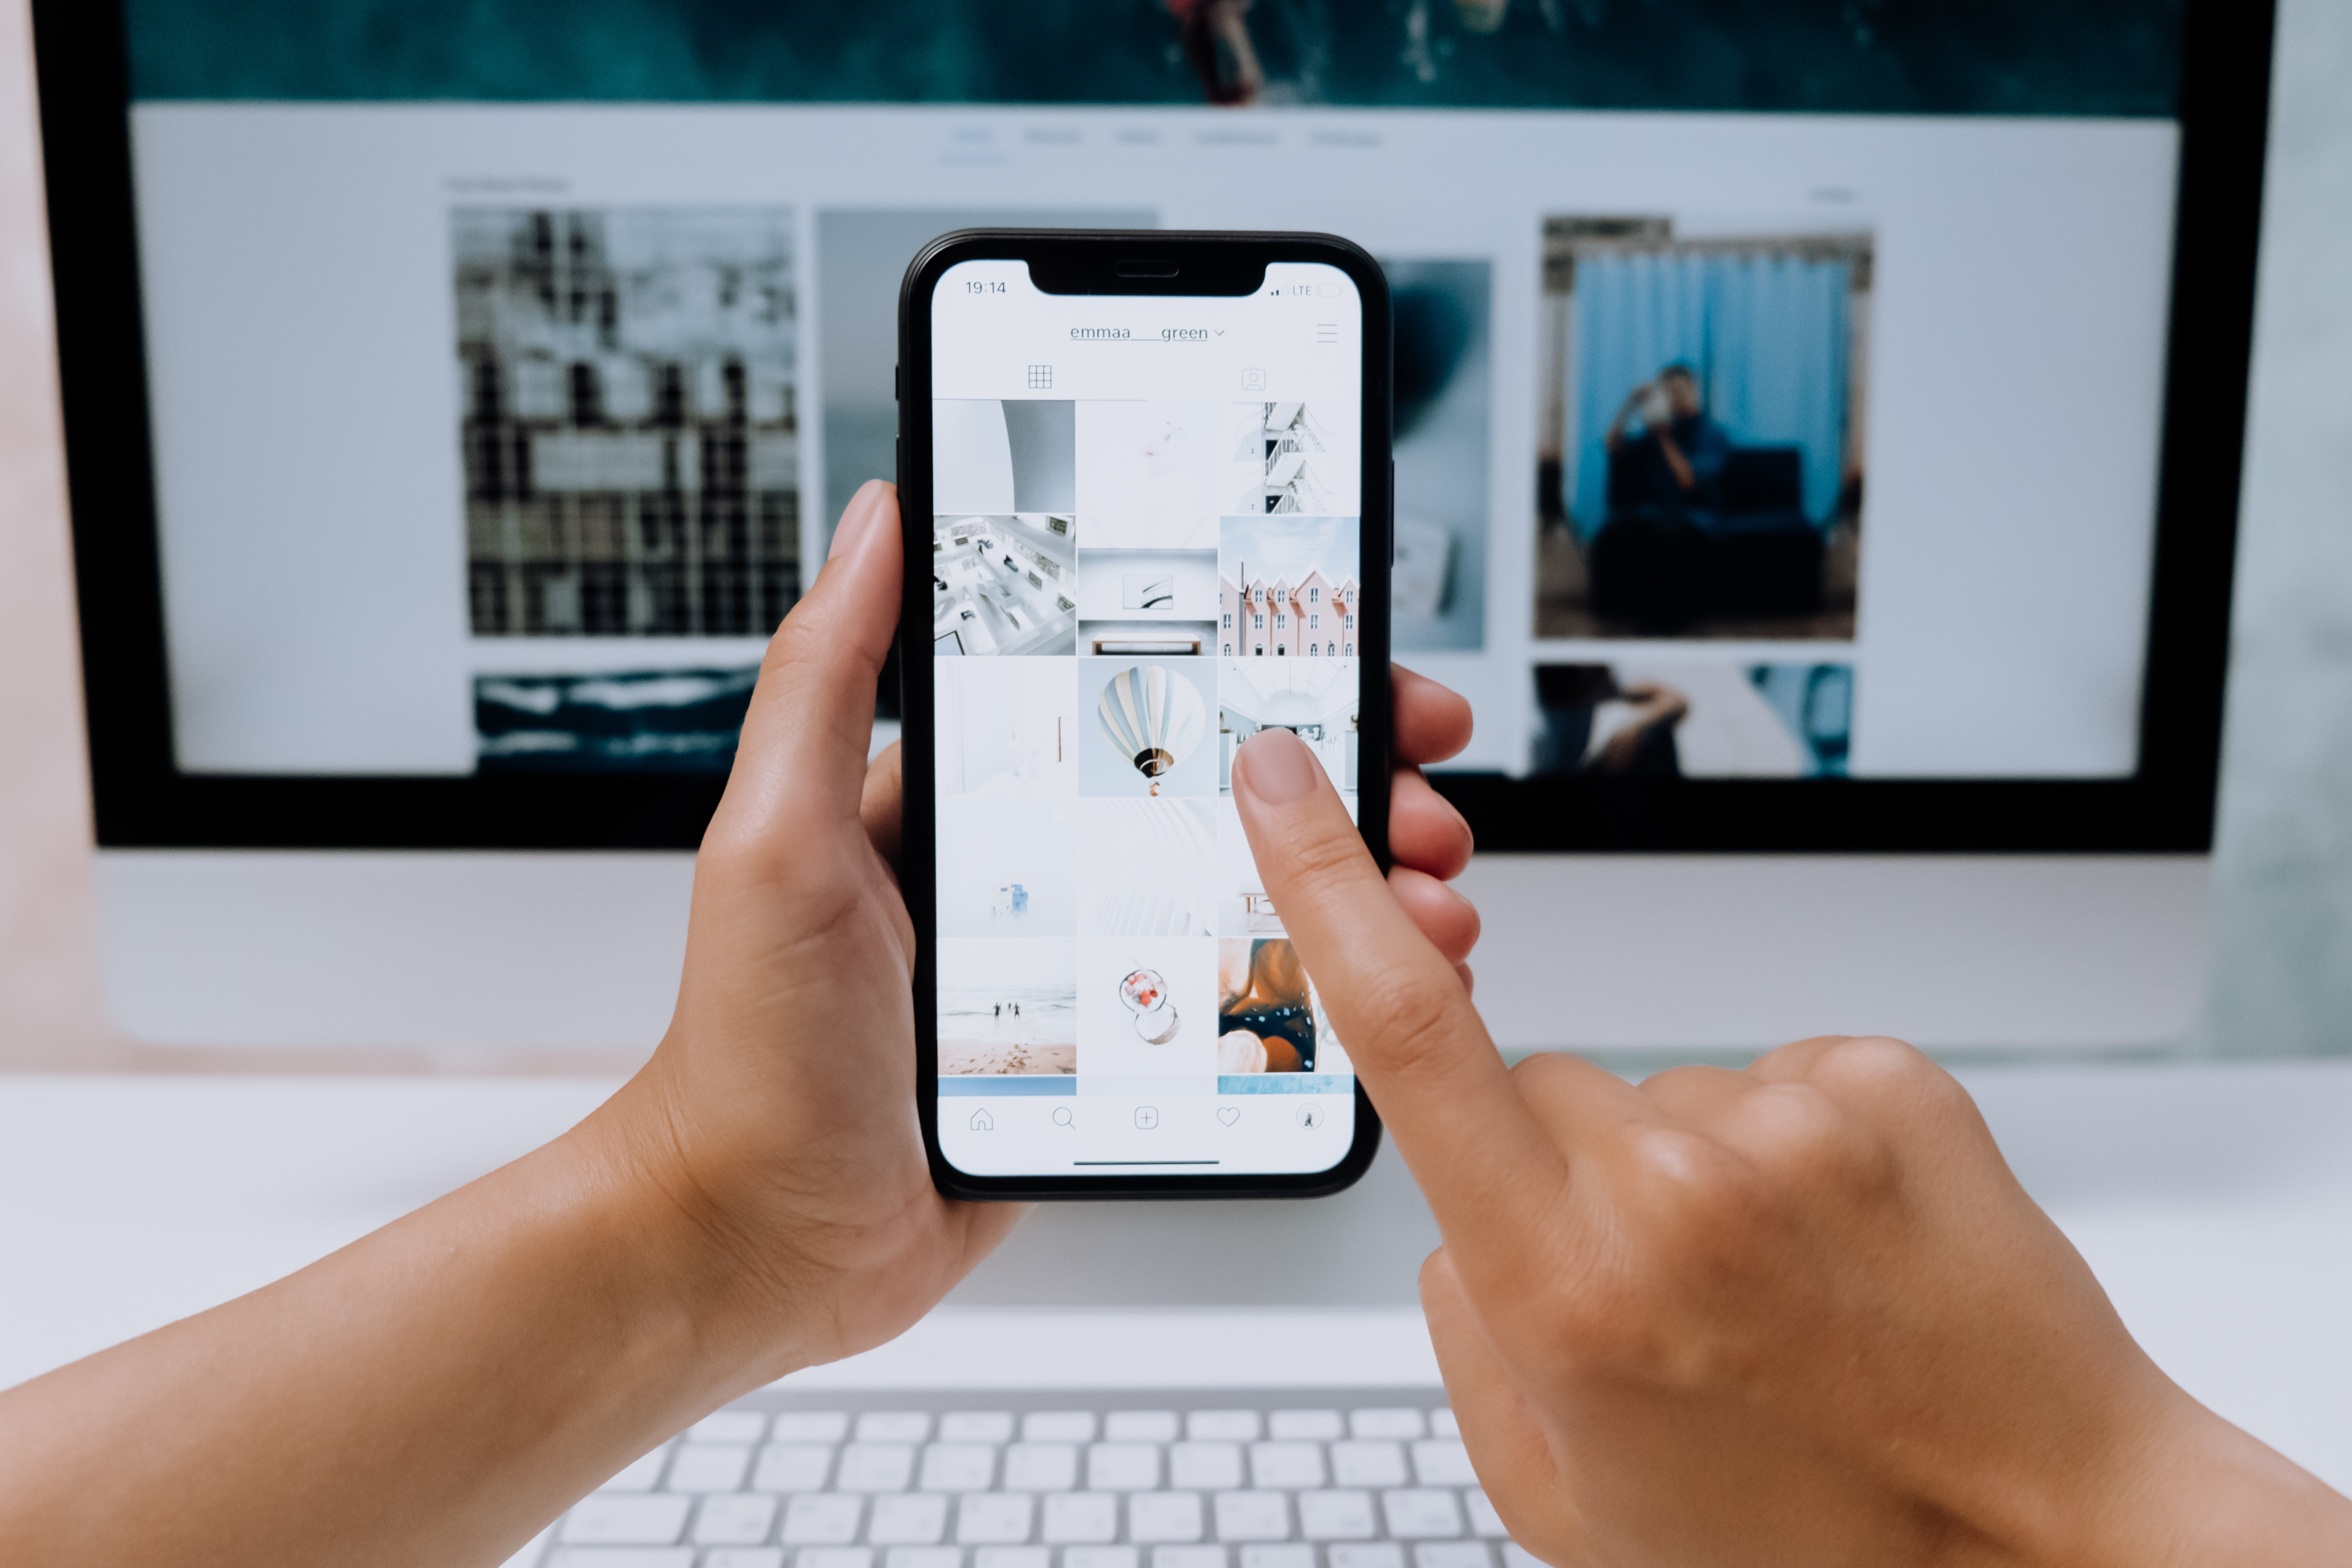 To ensure the success of your next event, solidify your marketing efforts such as developing mobile event apps and using social media as engagement tools.